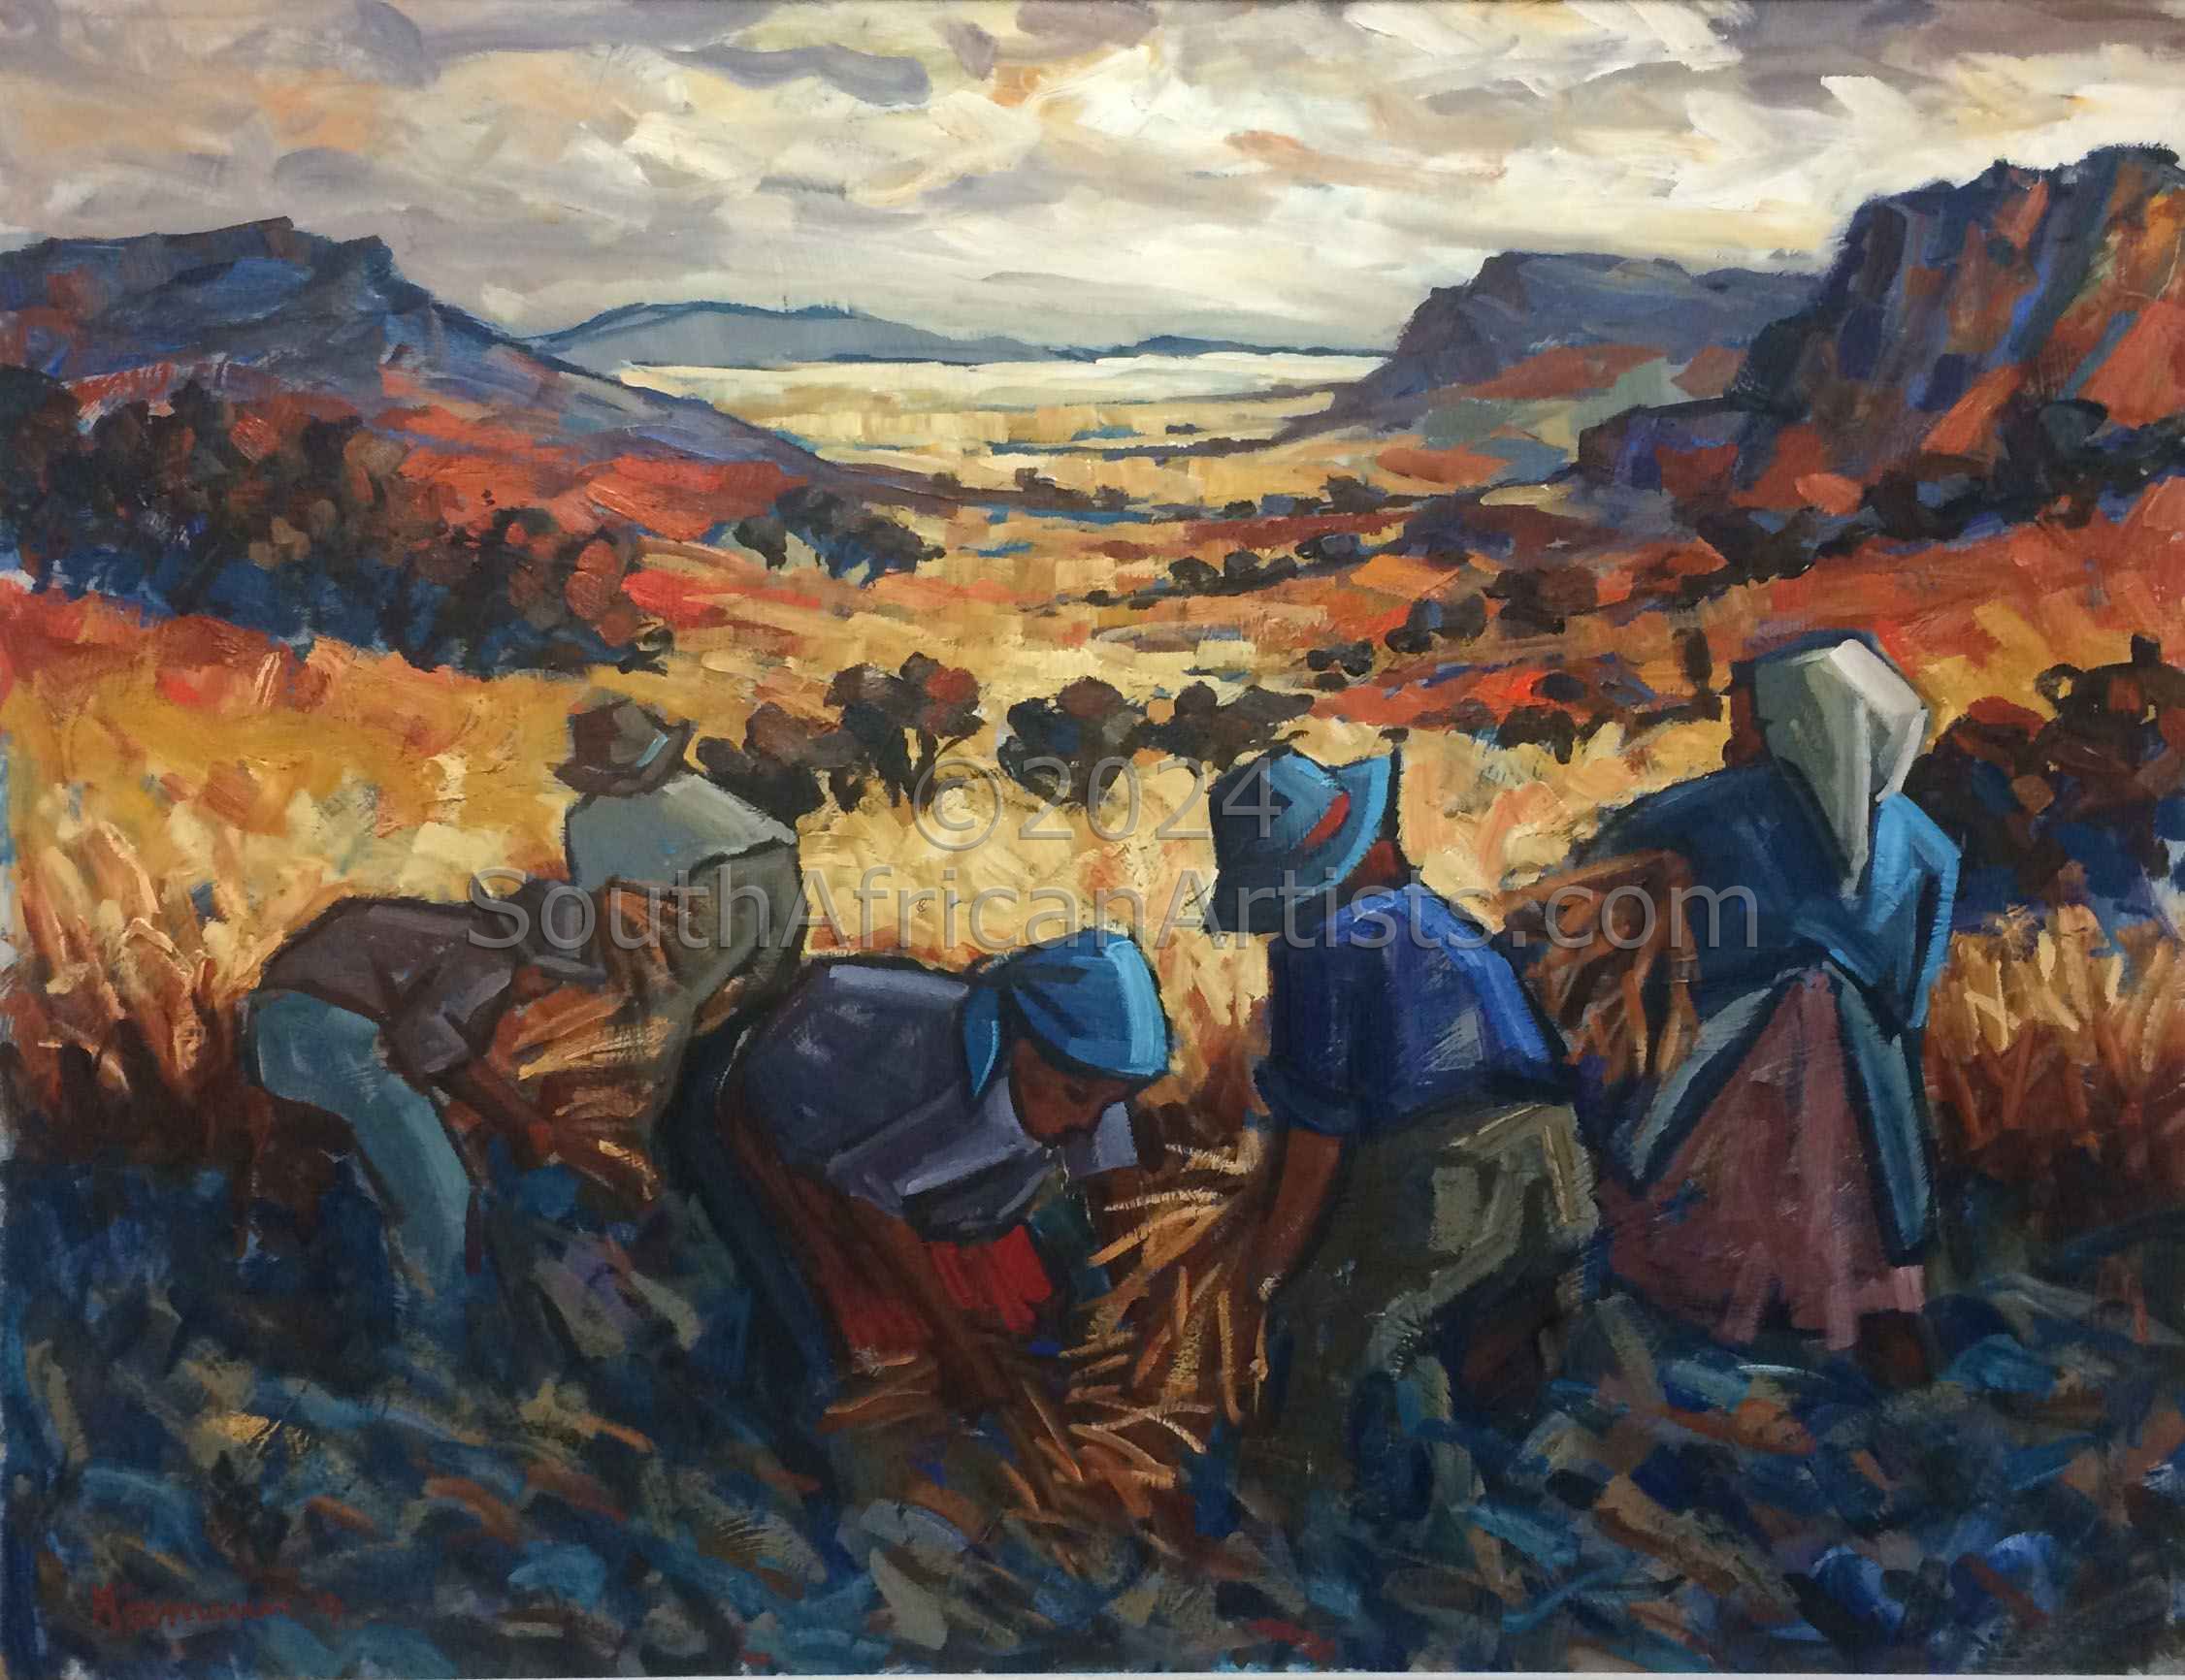 Harvesters in a Landscape